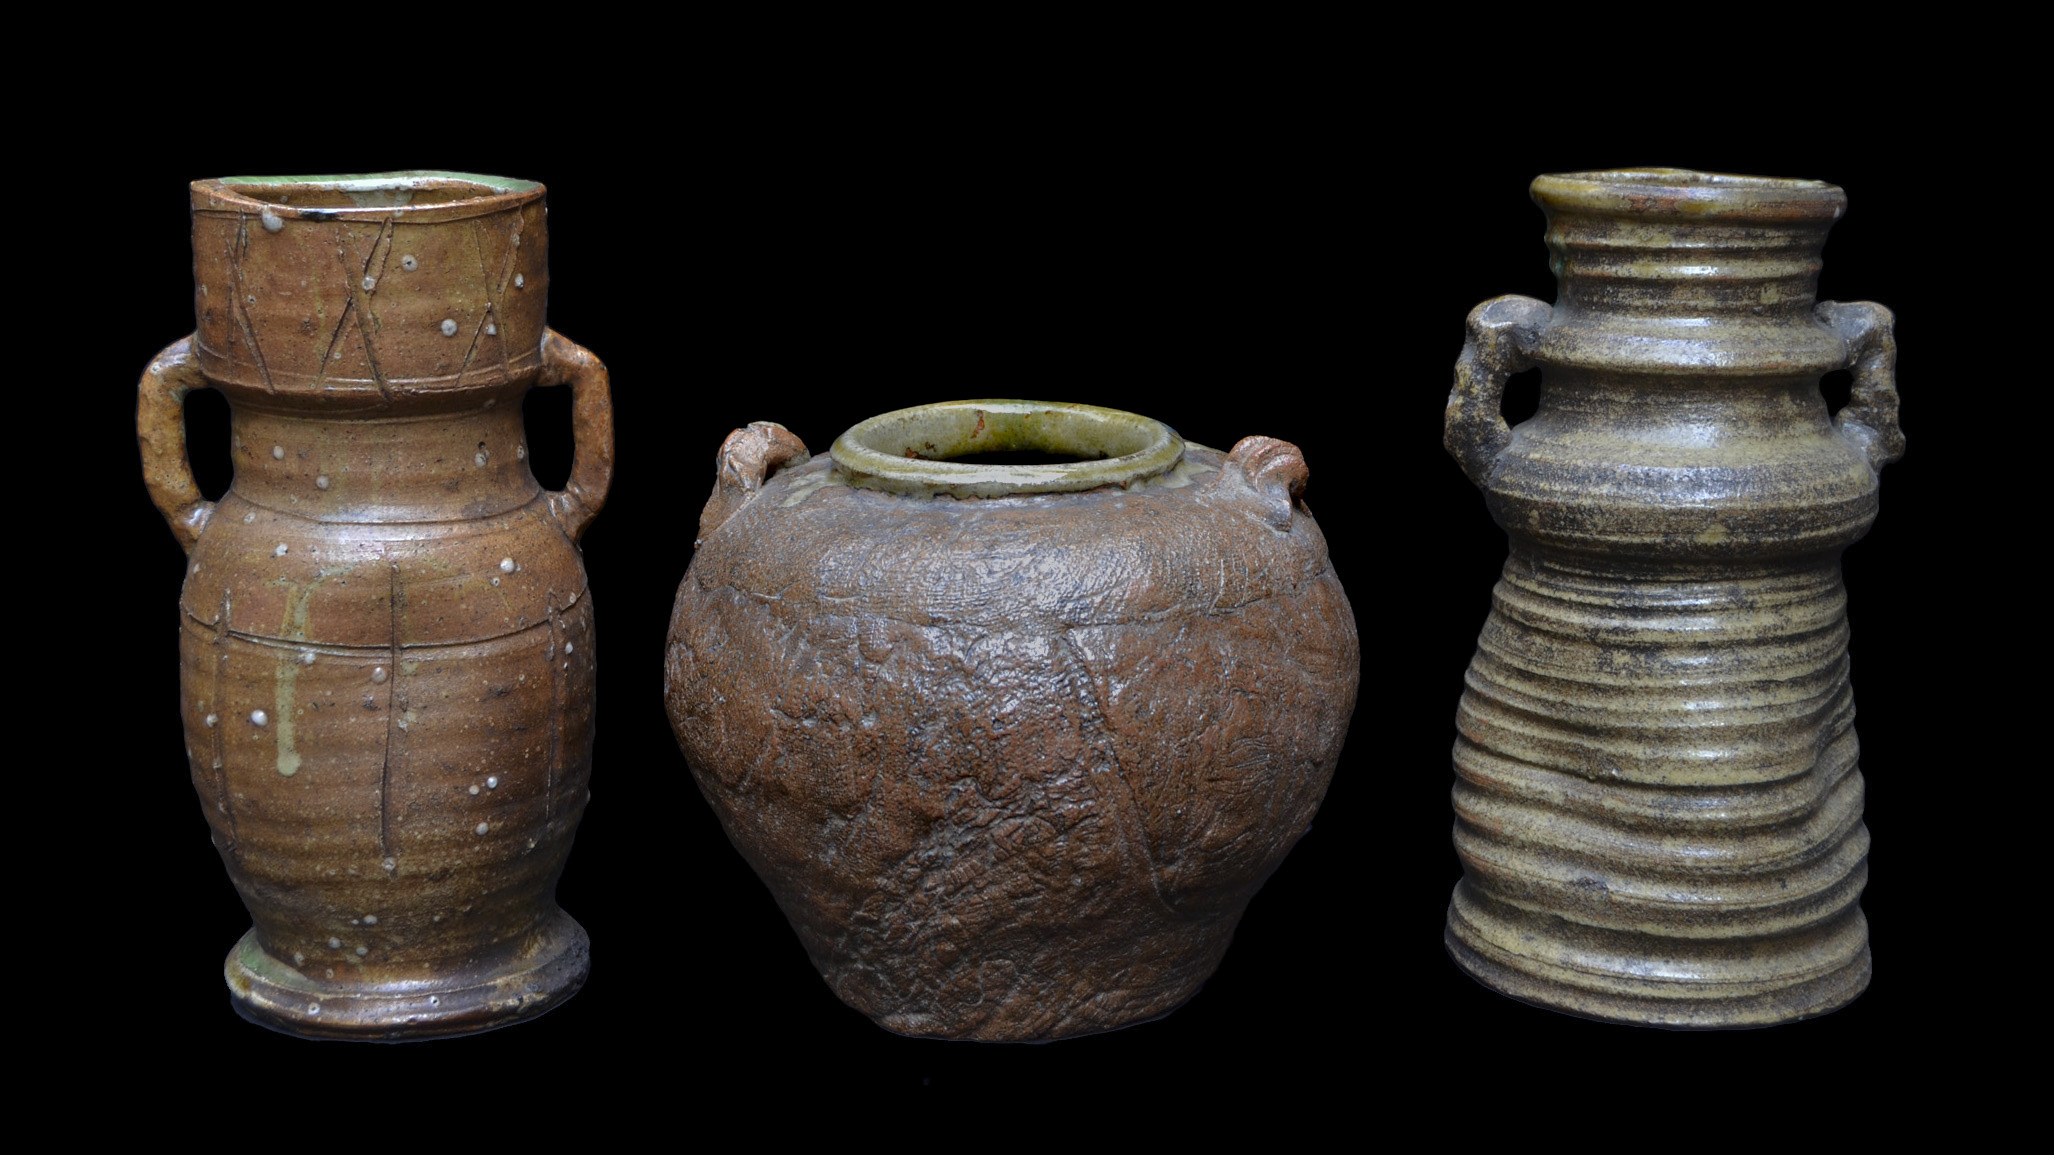 A Collection of Three Fine Old Shigaraki Vases from Japan